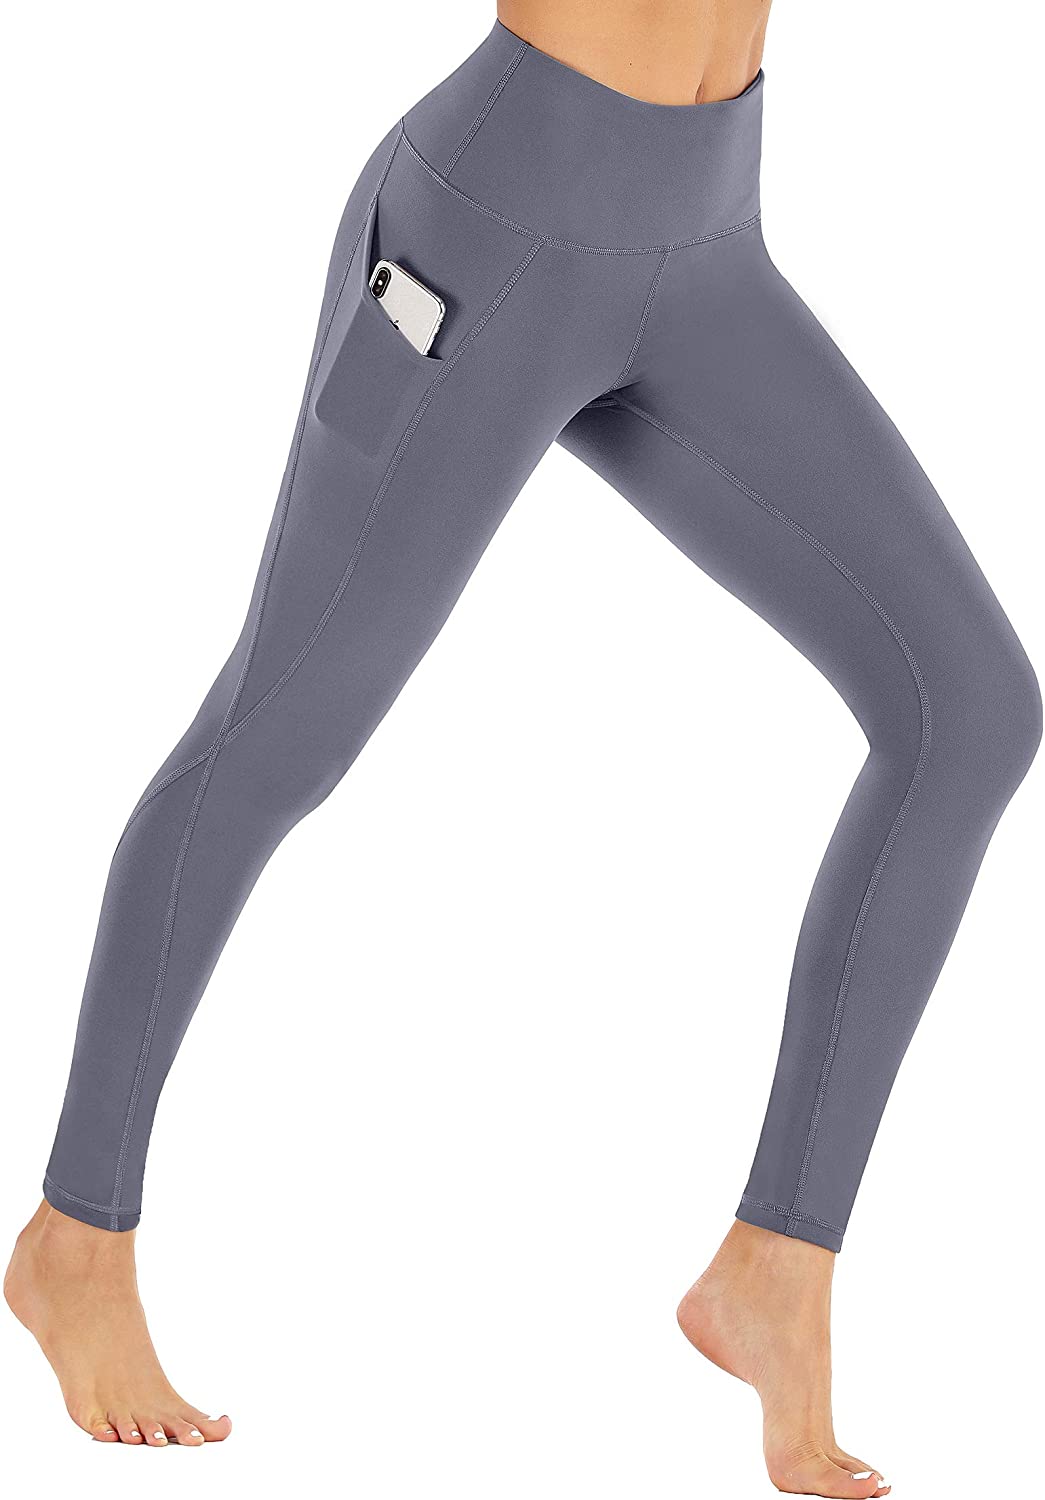 Buy GROTEEN Fleece Lined Leggings with Pockets for Women - High Waisted  Winter Thermal Workout Yoga Pants at Amazon.in